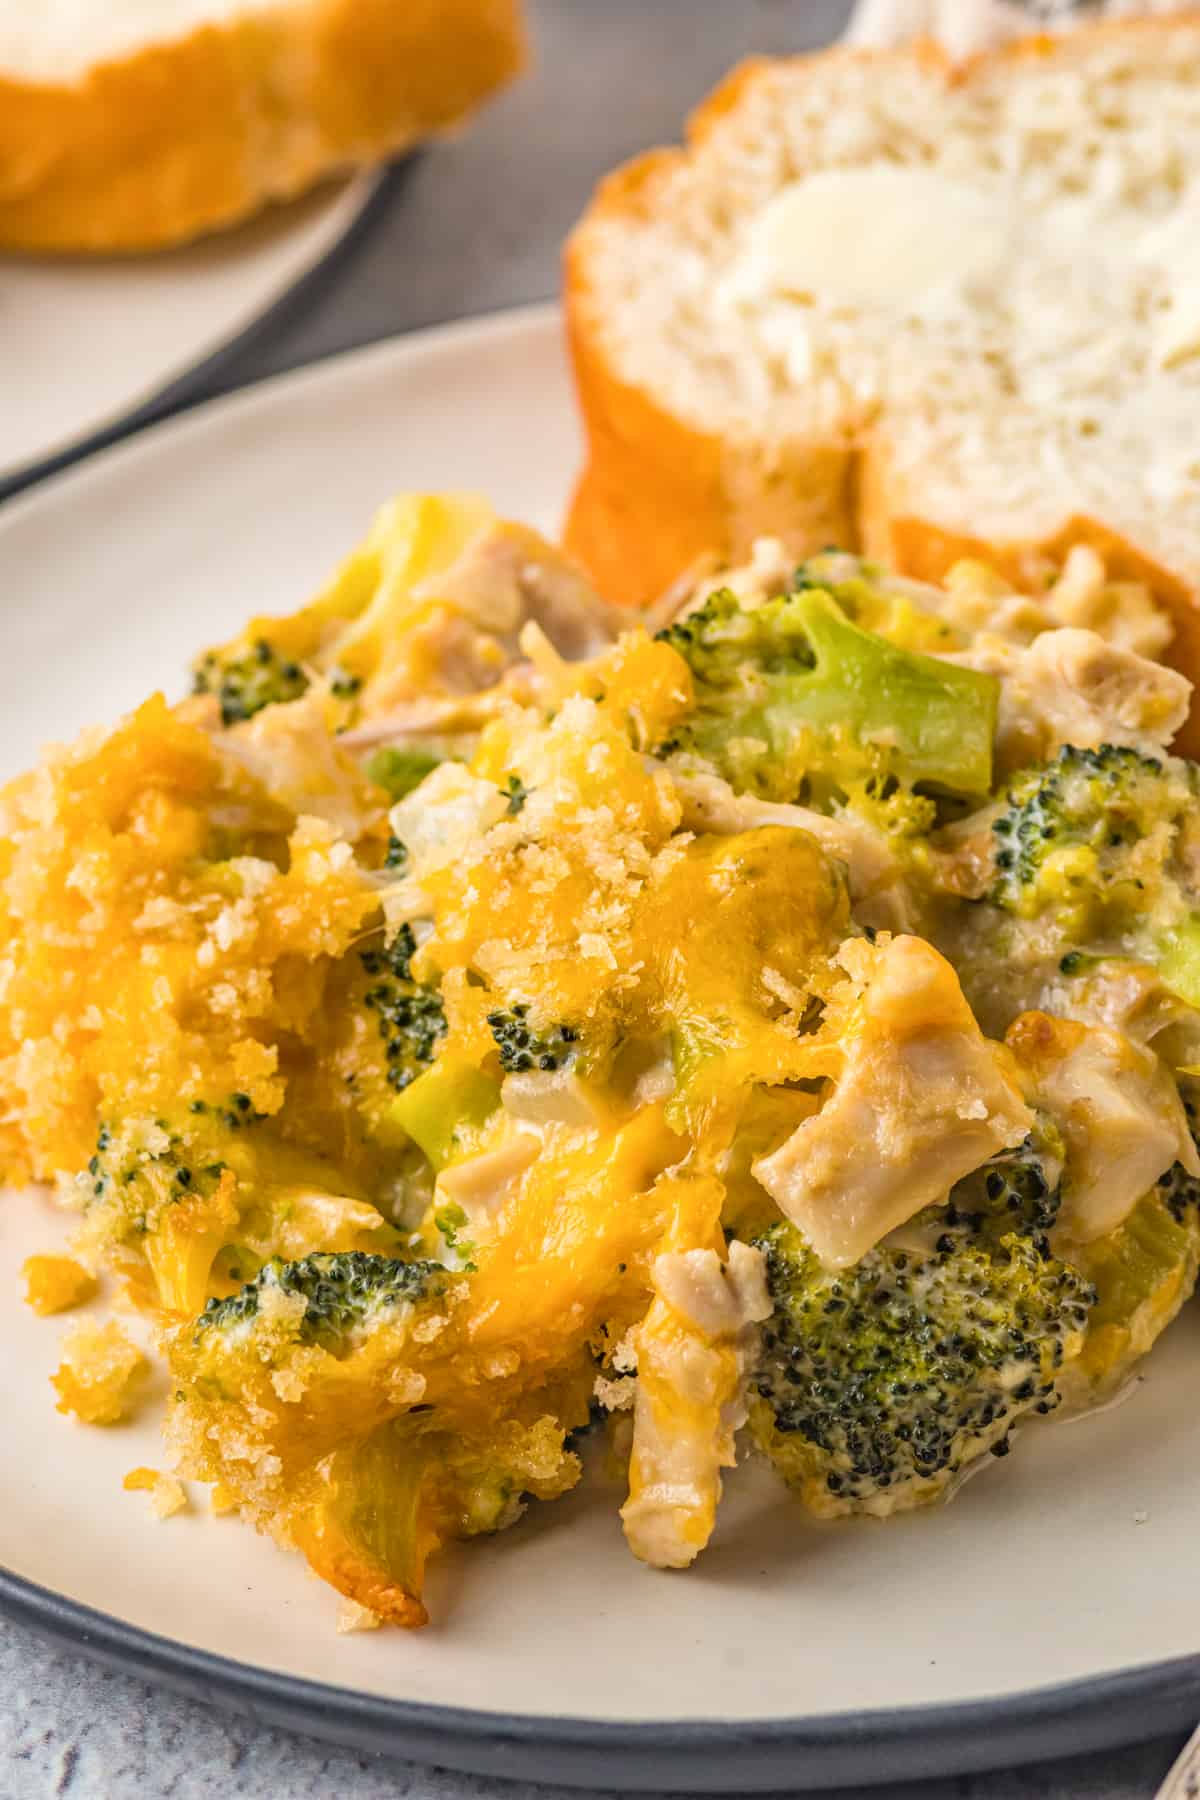 Creamy chicken and broccoli casserole on a white plate with piece of bread.